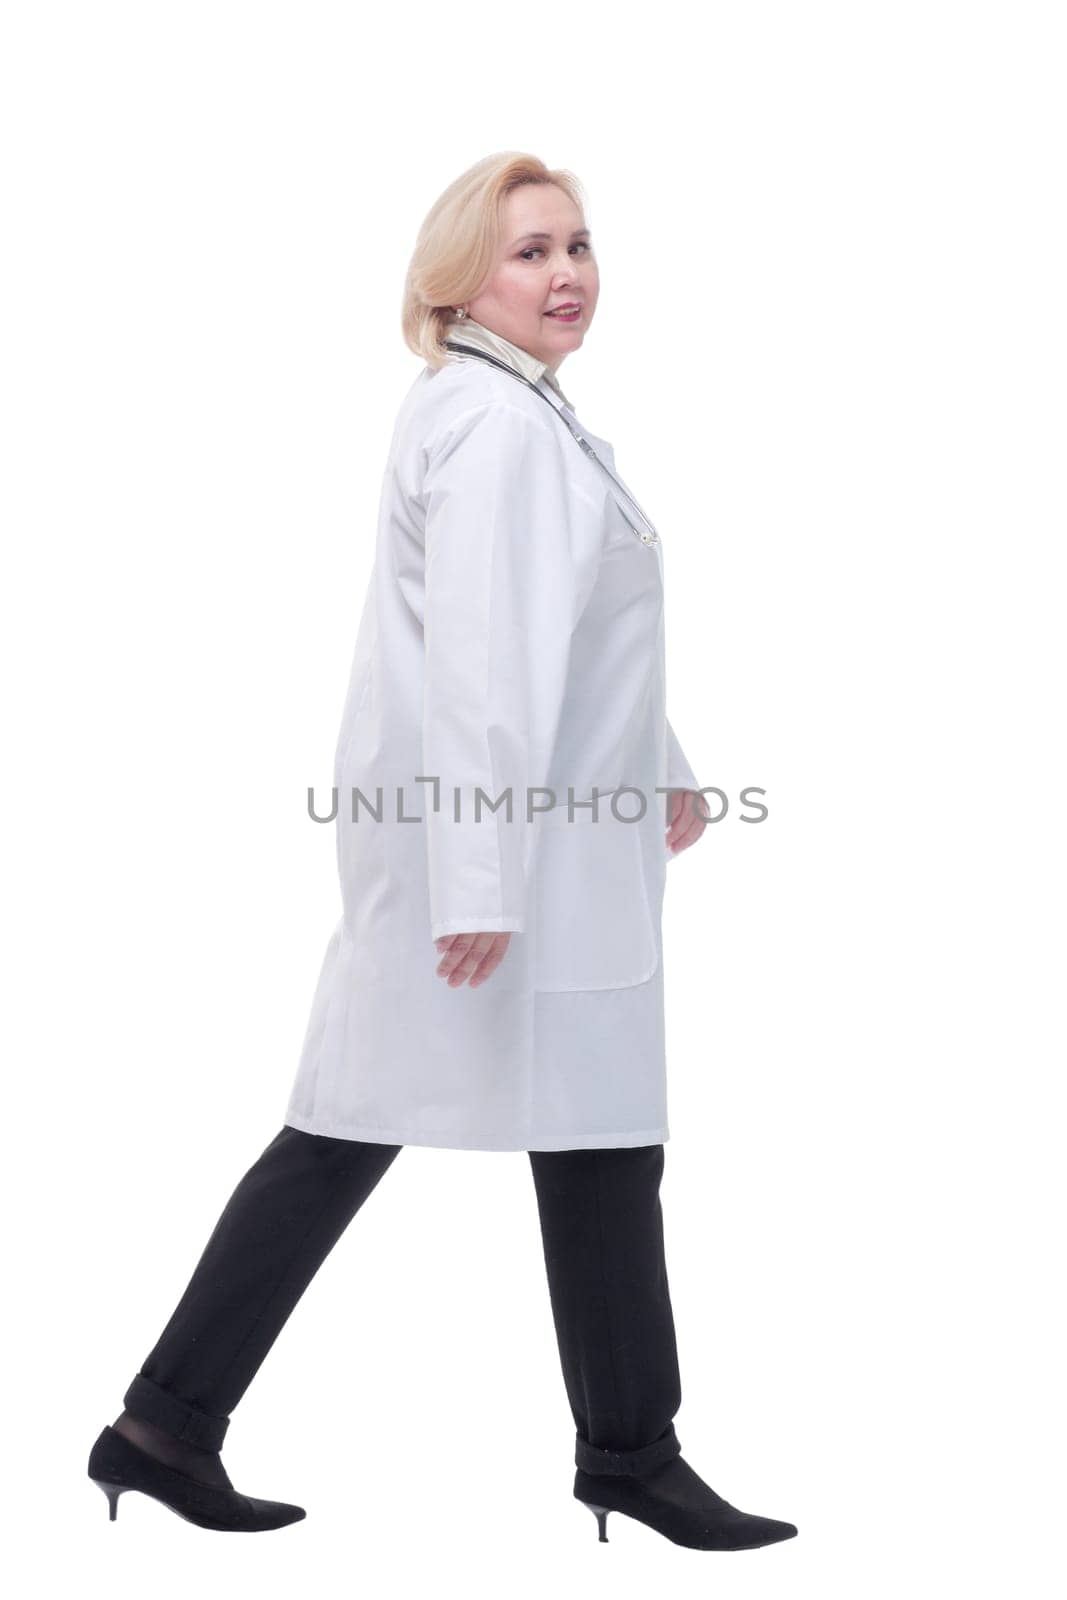 Female doctor walking towards the camera smiling isolated over a white background